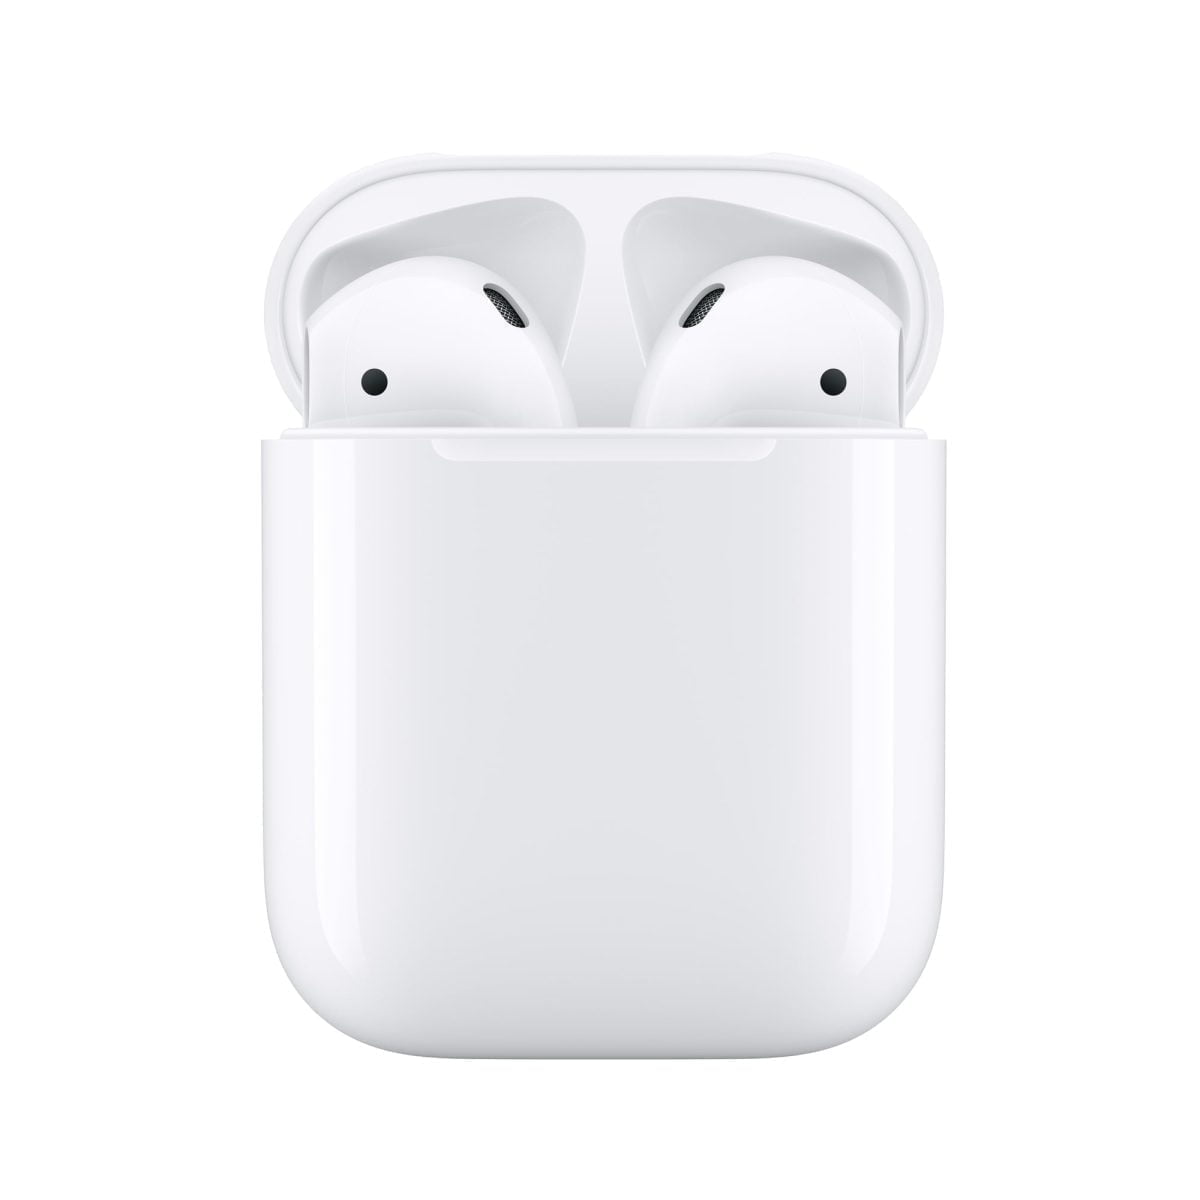 Mv7N2 Apple &Lt;H1&Gt;Apple Airpods (2Nd Generation) - White&Lt;/H1&Gt; &Lt;Div Class=&Quot;Product-Description&Quot;&Gt;With High-Quality Sound, Voice-Activated Siri, And Complete With Charging Case That Provides Over 24 Hours Of Listening Time, Airpods Deliver An Unparalleled Wireless Headphone Experience. They’re Ready To Use With All Of Your Devices. Put Them In Your Ears And They Connect Immediately, Immersing You In Rich, High-Quality Sound. Just Like Magic.&Lt;/Div&Gt; Airpods Apple Airpods (2Nd Generation) - White (Mv7N2)